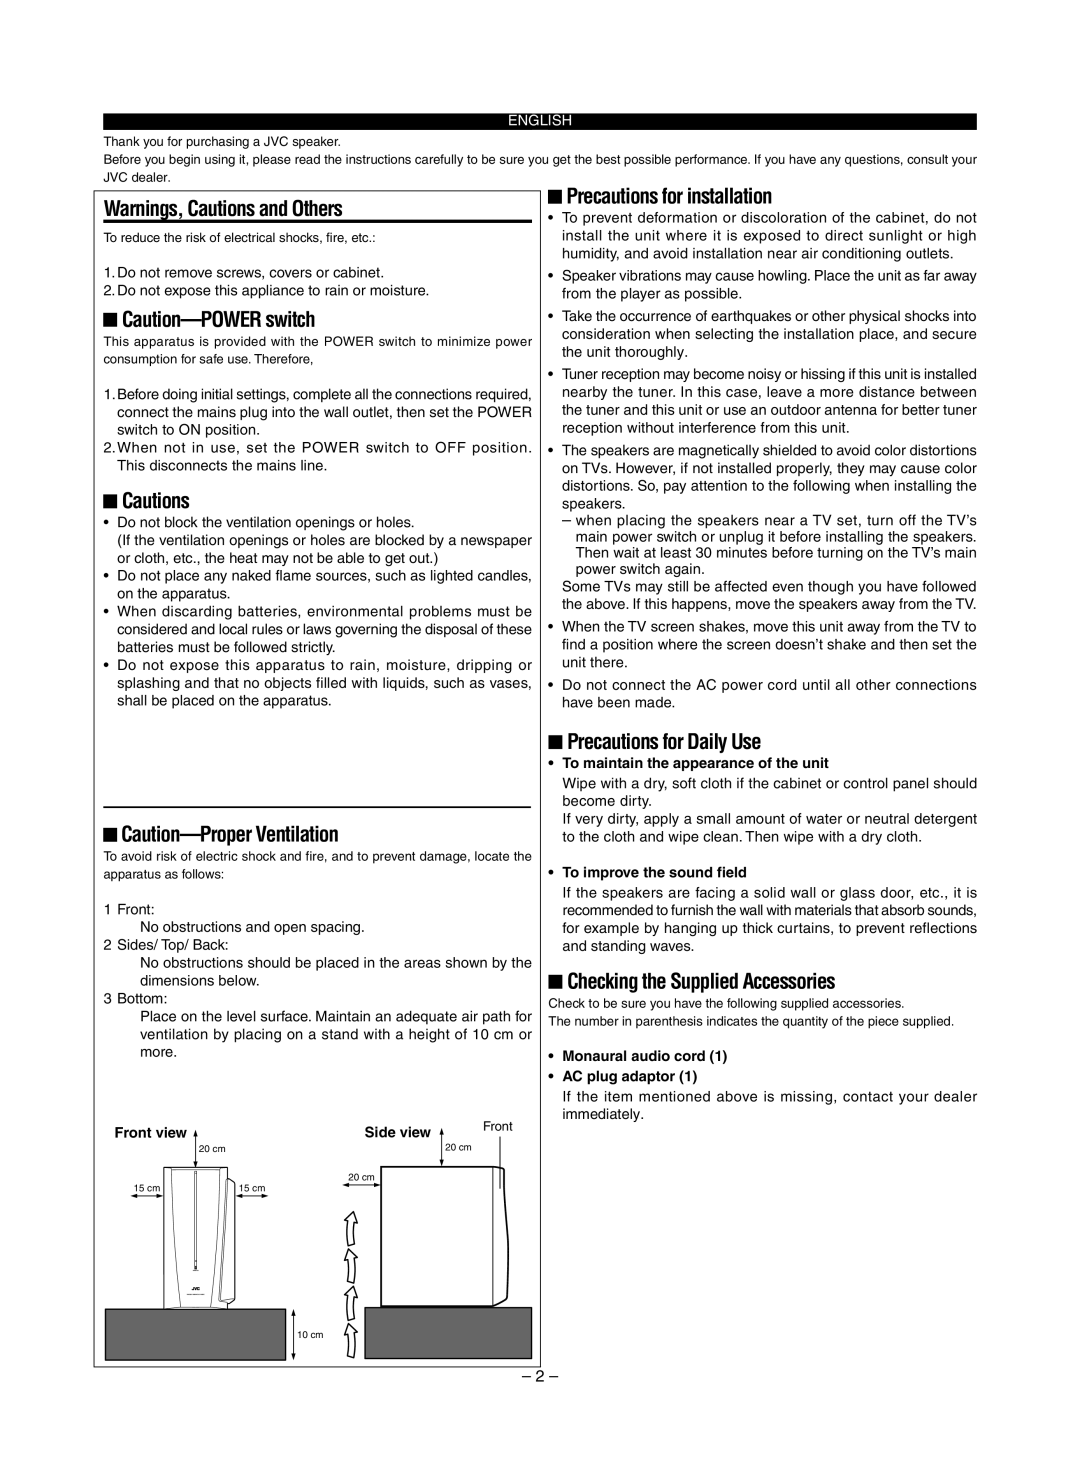 JVC LVT1305-004A Precautions for installation, Warnings, Cautions and Others, Caution-POWERswitch, English, Front view 